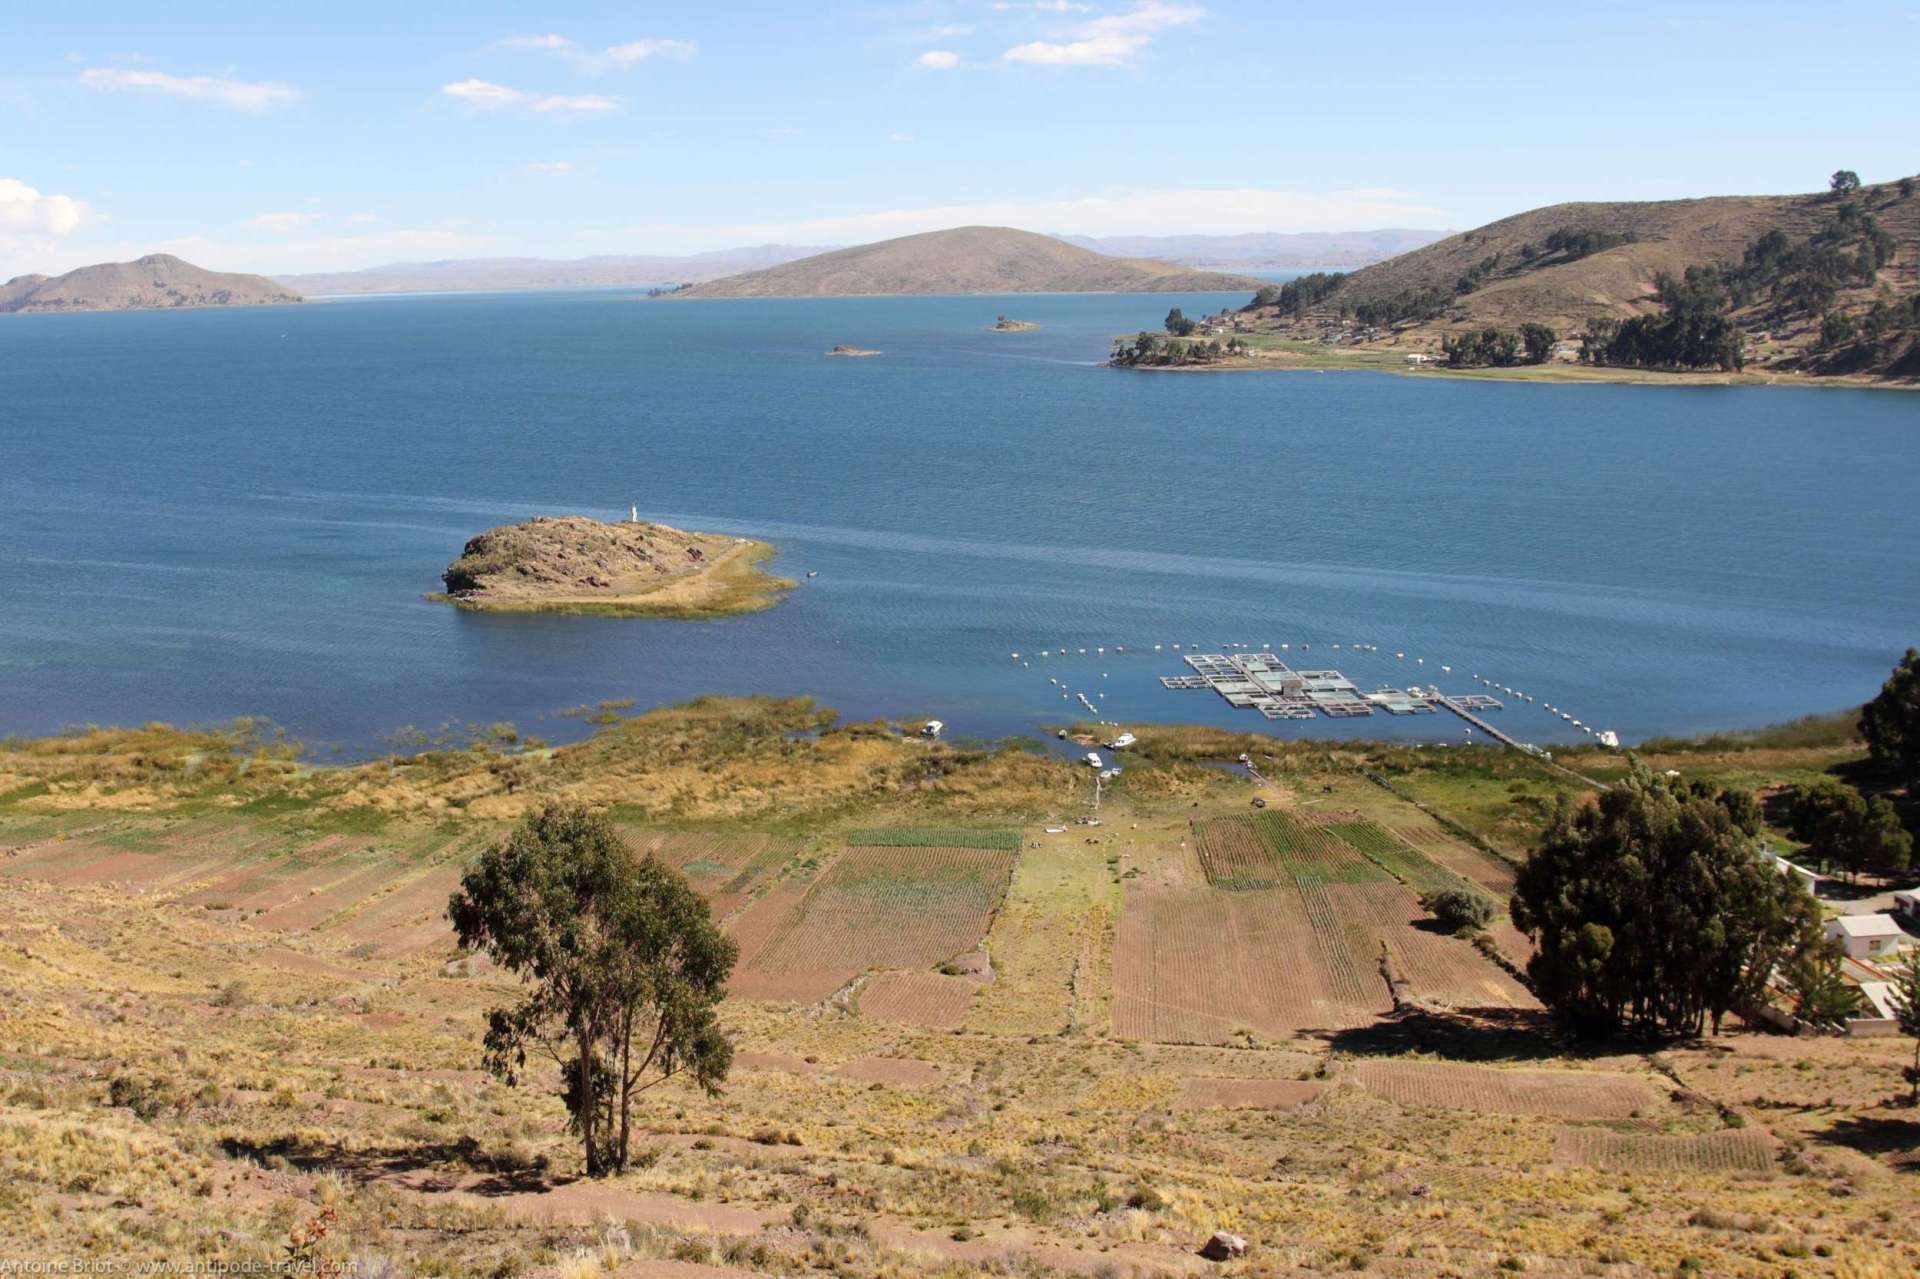 Cruise on Lake Titicaca, Antipode, Travel to Peru, Exquisite landscapes, 1920x1280 HD Desktop